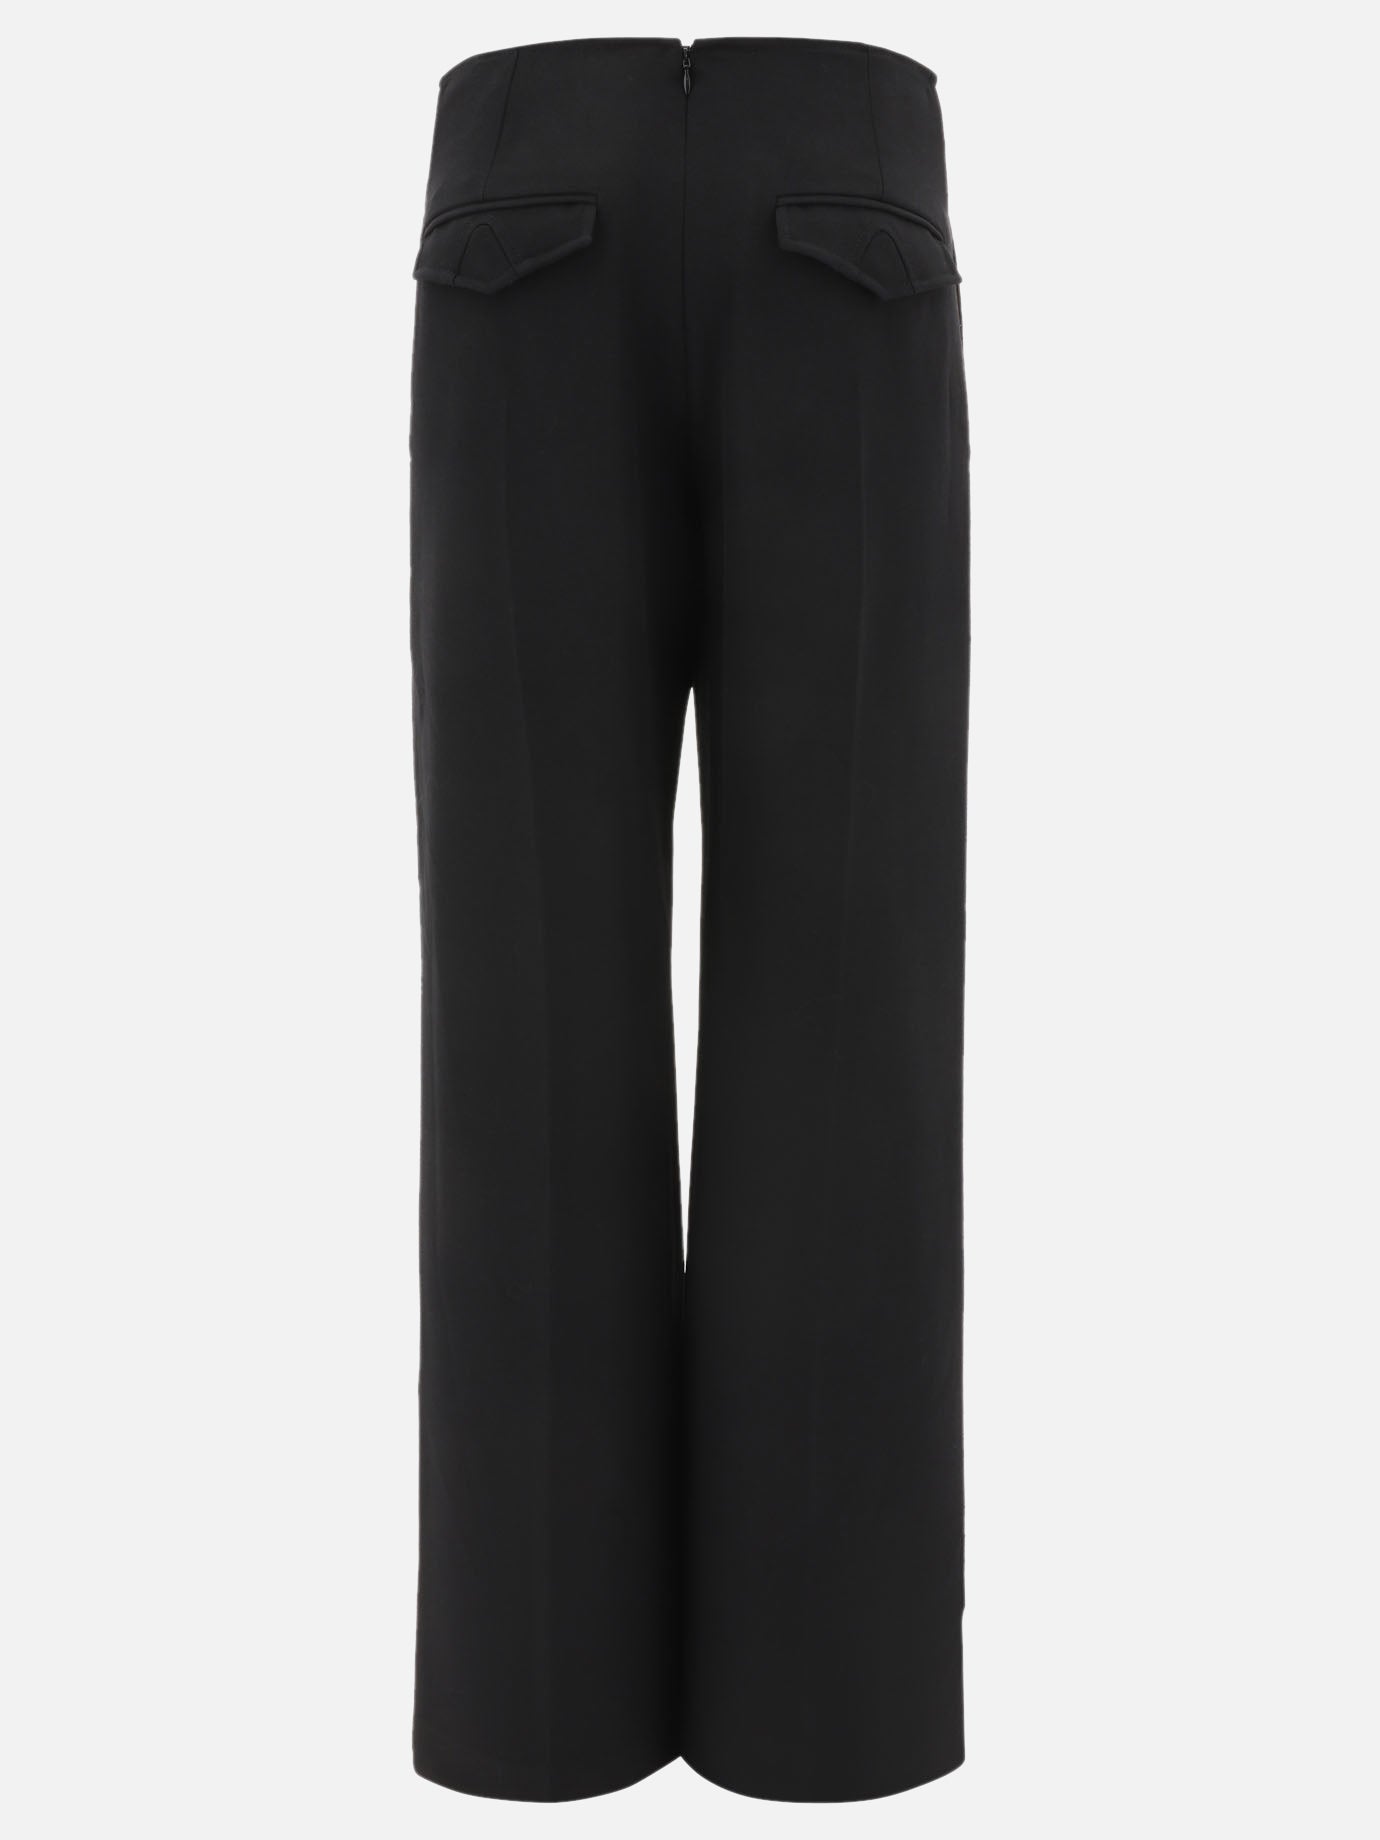 "V-Wire" trousers